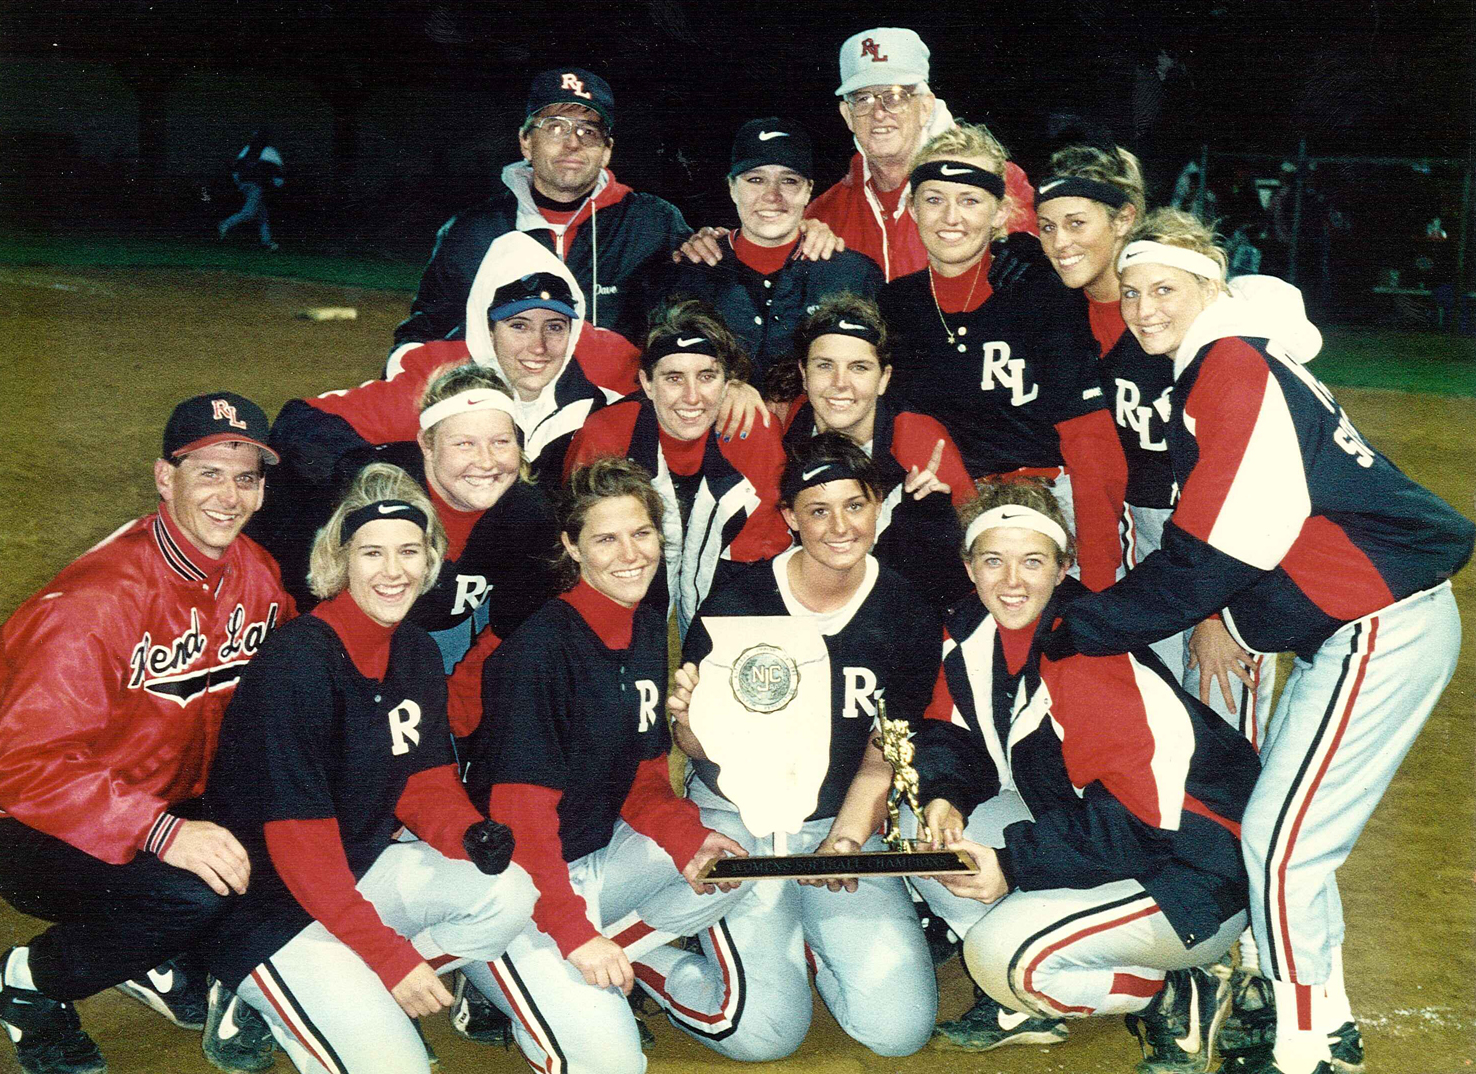 Ellingsworth and the 1995-96 Softball Team celebrate a NJCAA National Fast-Pitch Championship appearance. The team was inducted into RLC's Hall of Fame in 2009. 